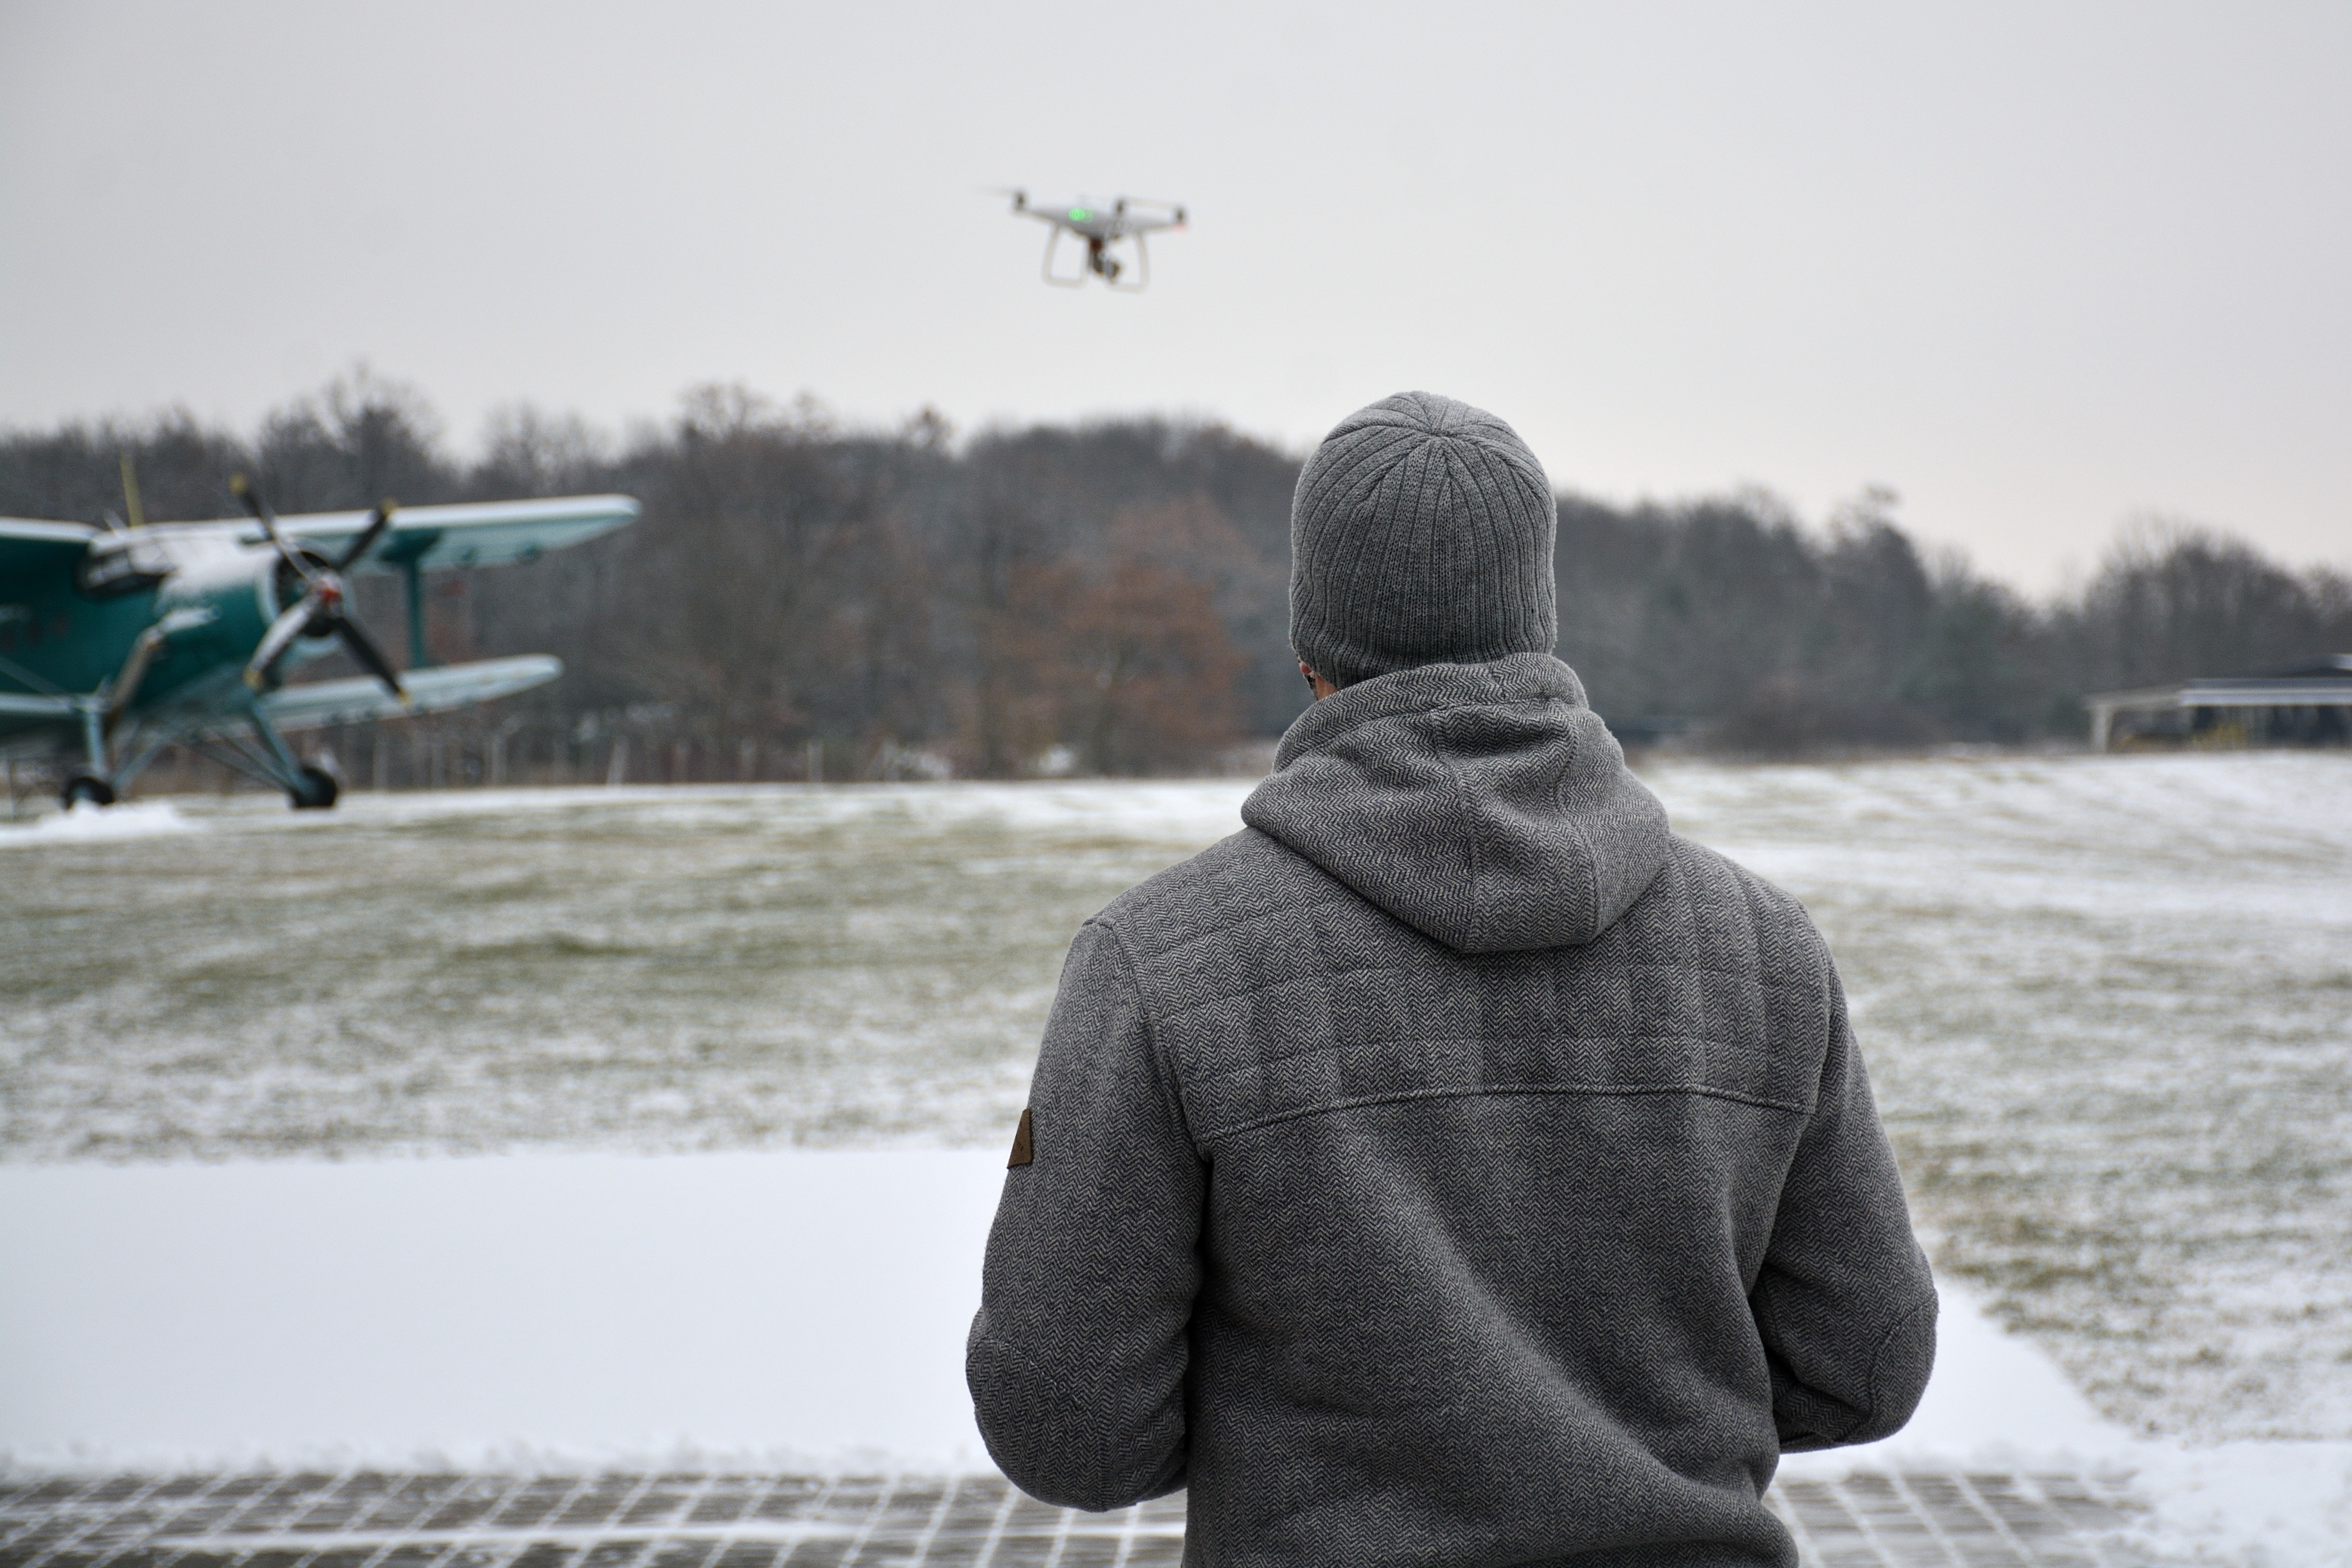 New rules for safer use of drones: new categories and registration from the end of 2020